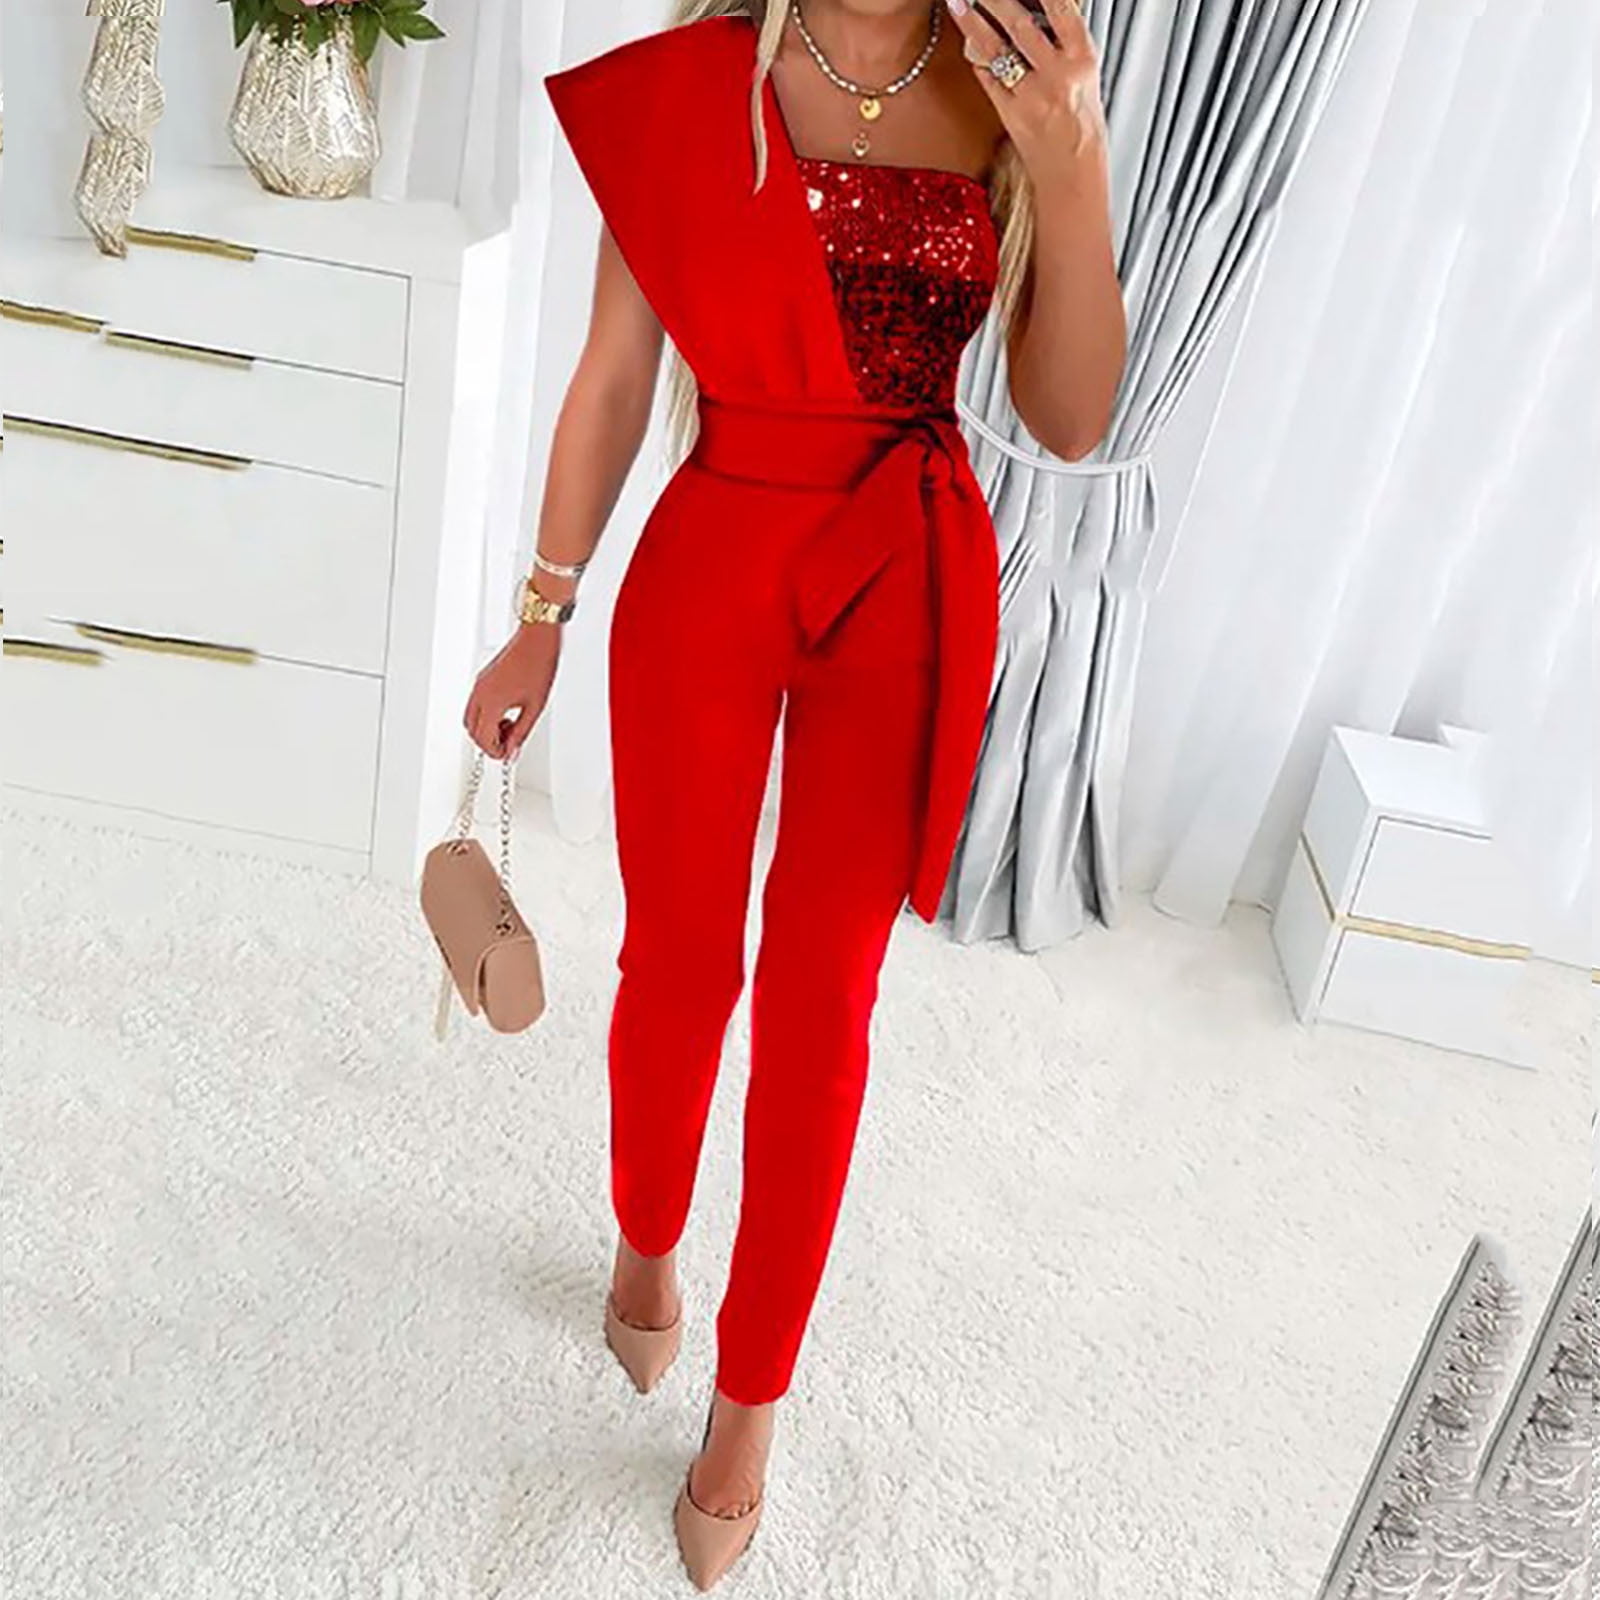 Aueoeo Petite Jumpsuits for Women, Women's Summer Casual